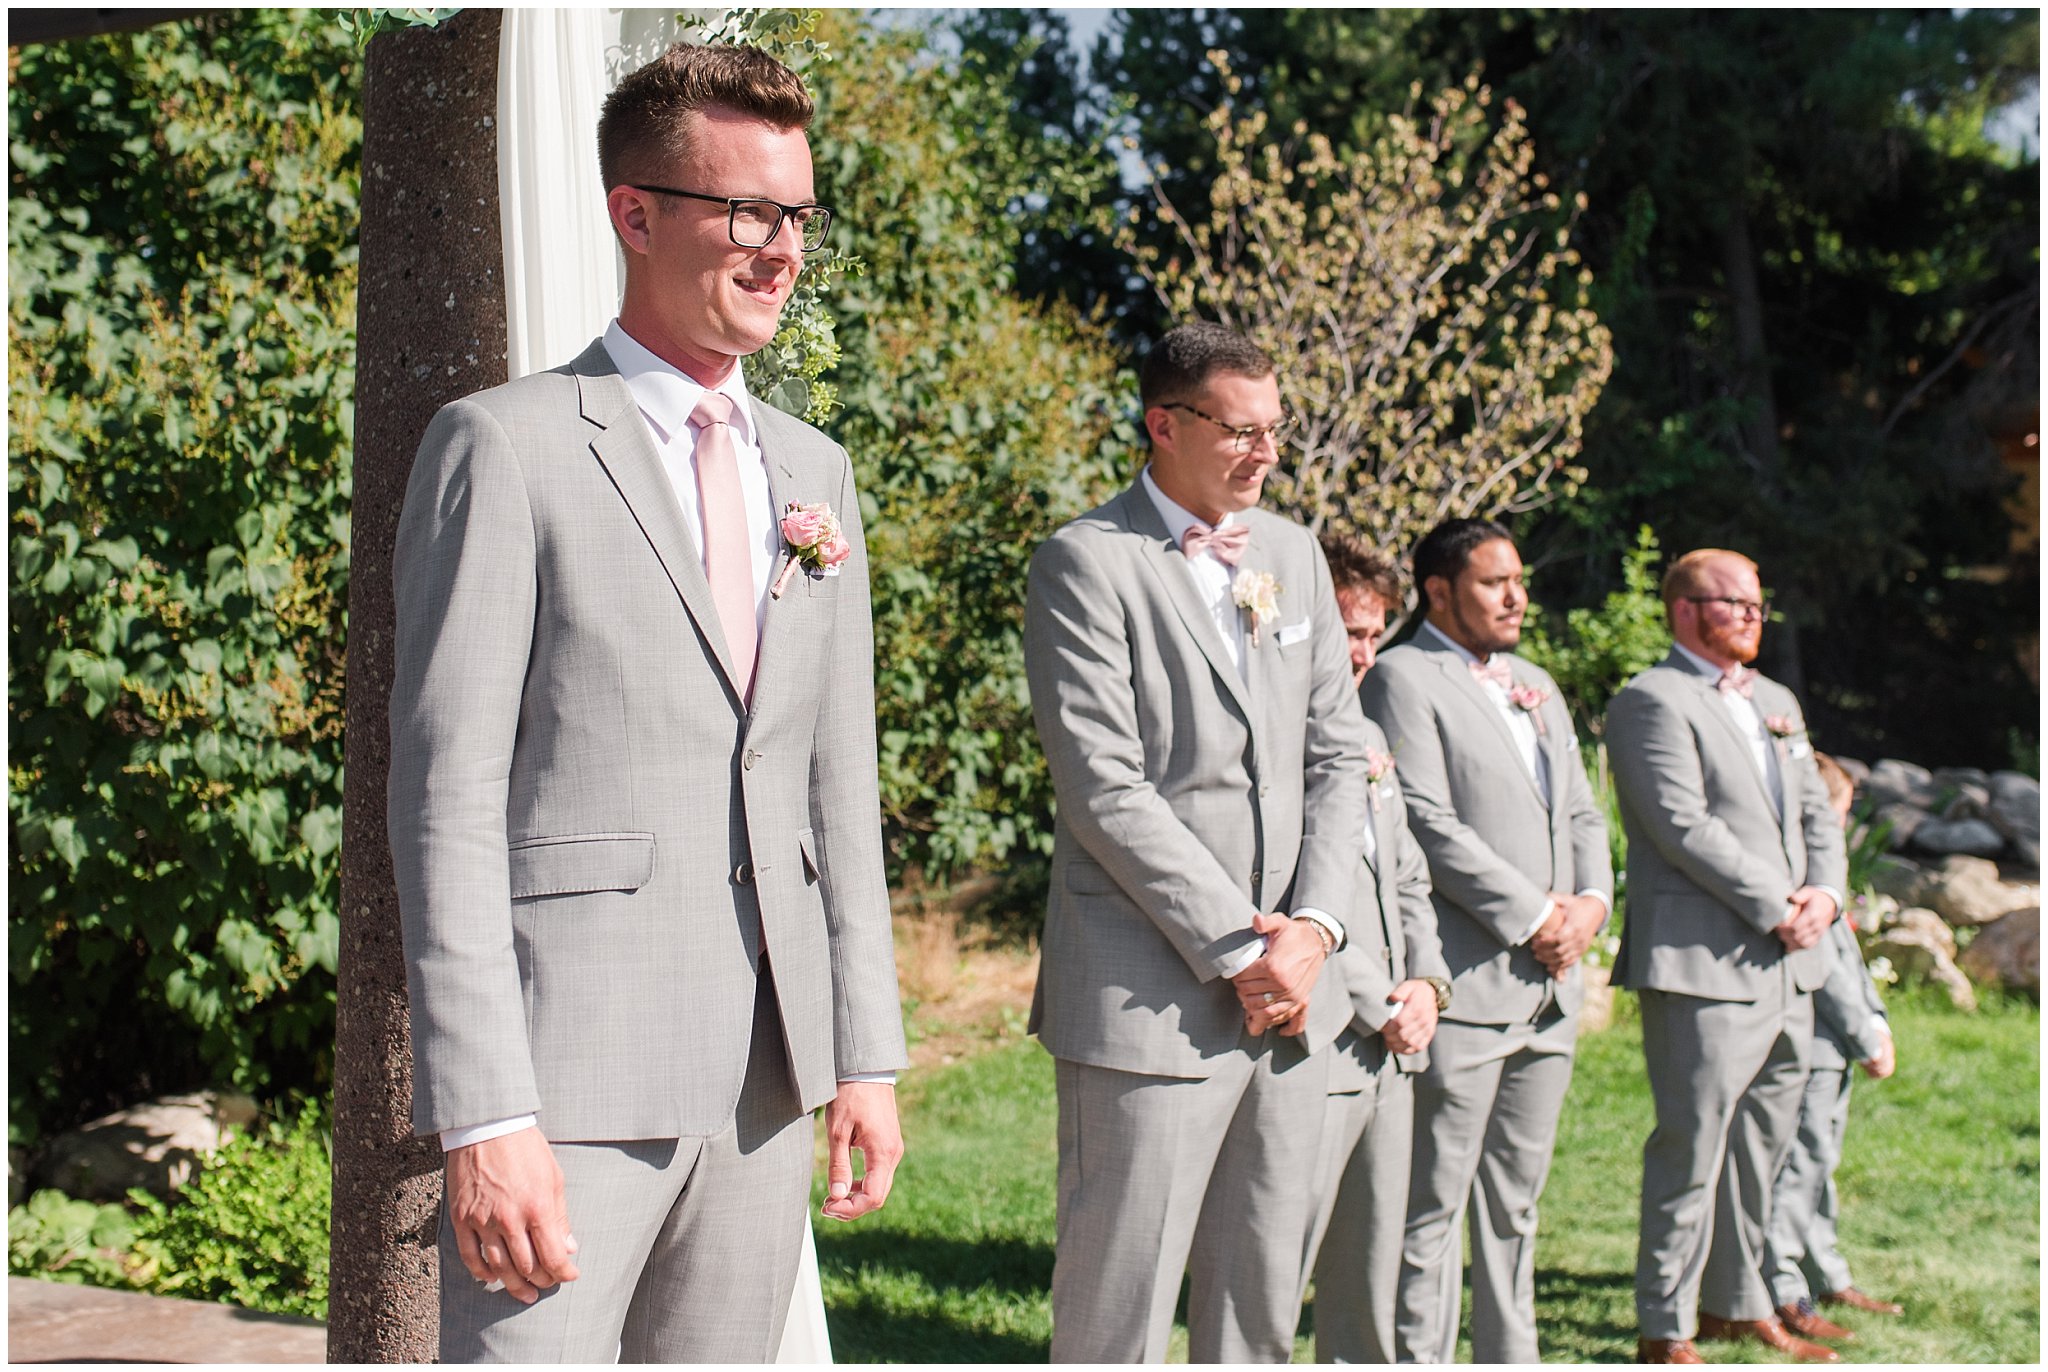 Groom sees bride for the first time | Oak Hills Utah Dusty Rose and Gray Summer Wedding | Jessie and Dallin Photography